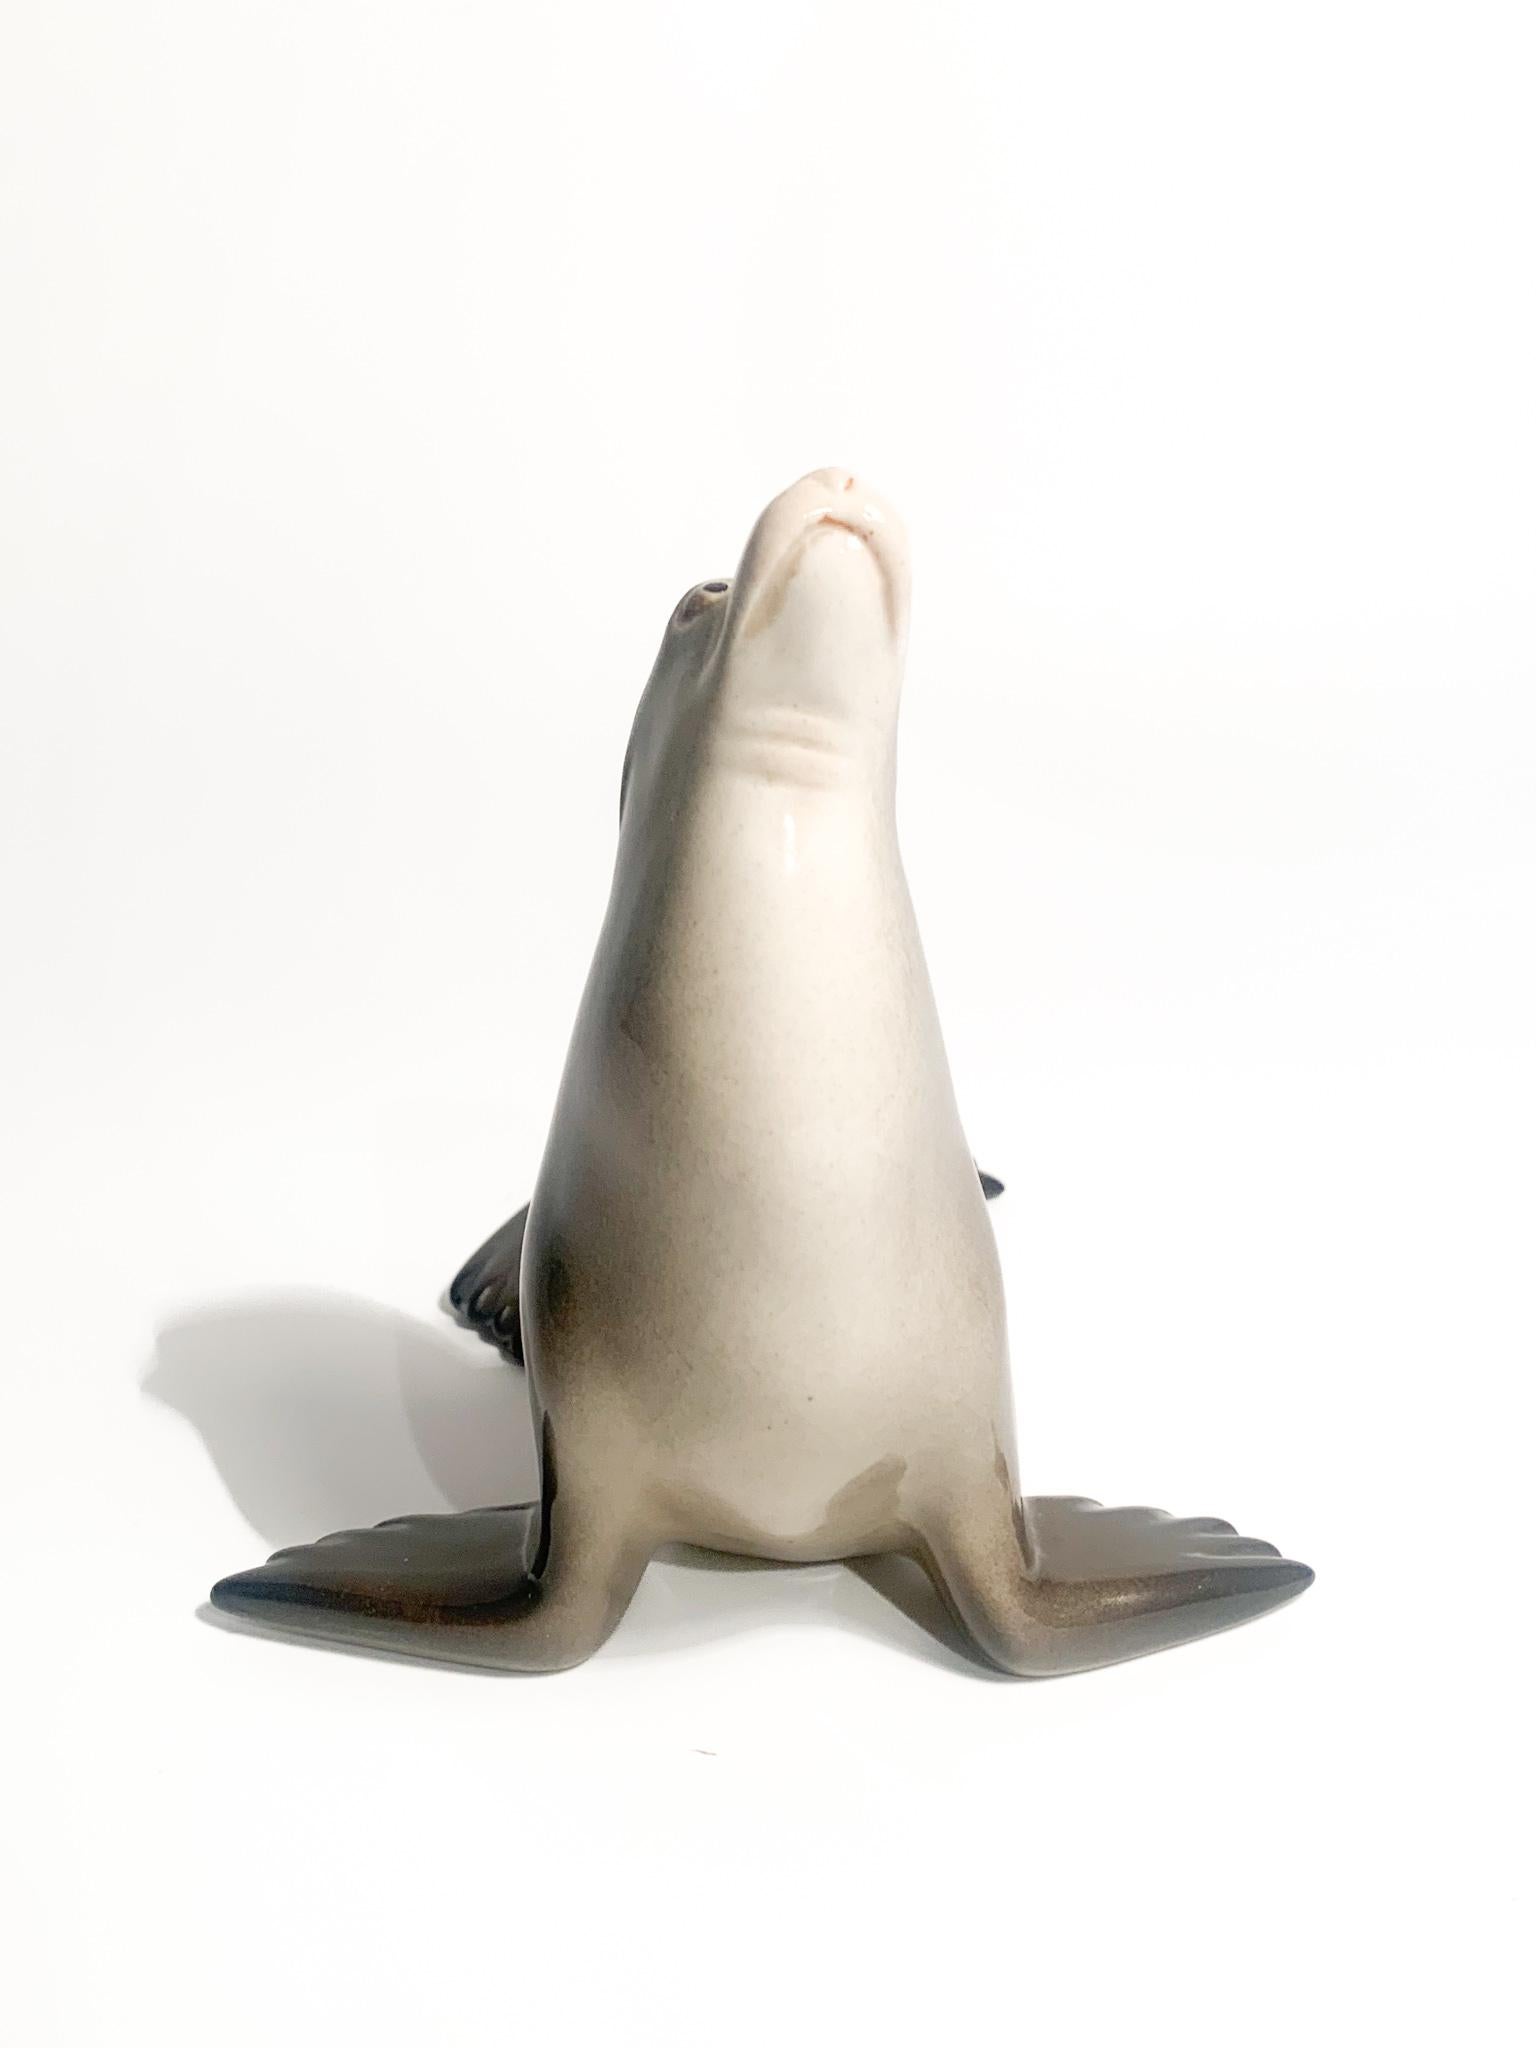 URSS Ceramic Sculpture of a Seal from the 1940s In Good Condition For Sale In Milano, MI